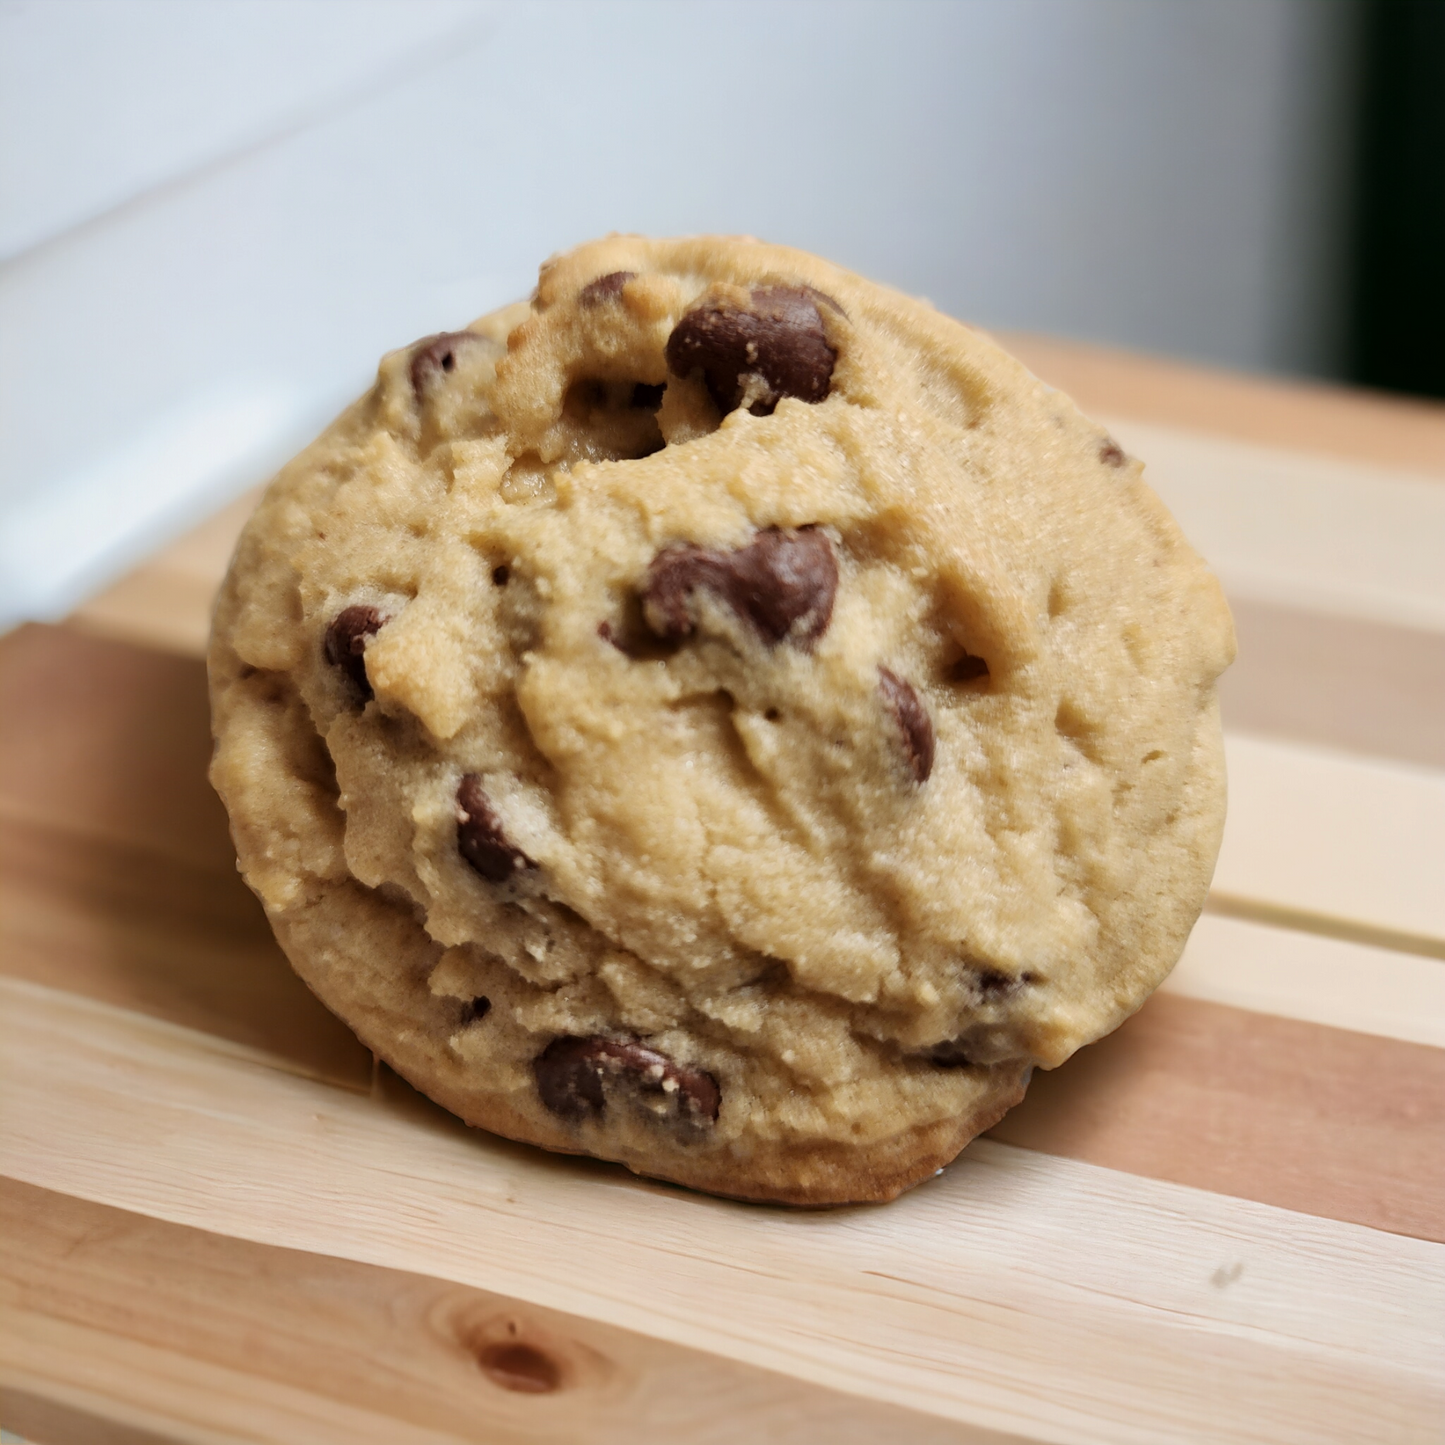 Chocolate chip cookie - 2